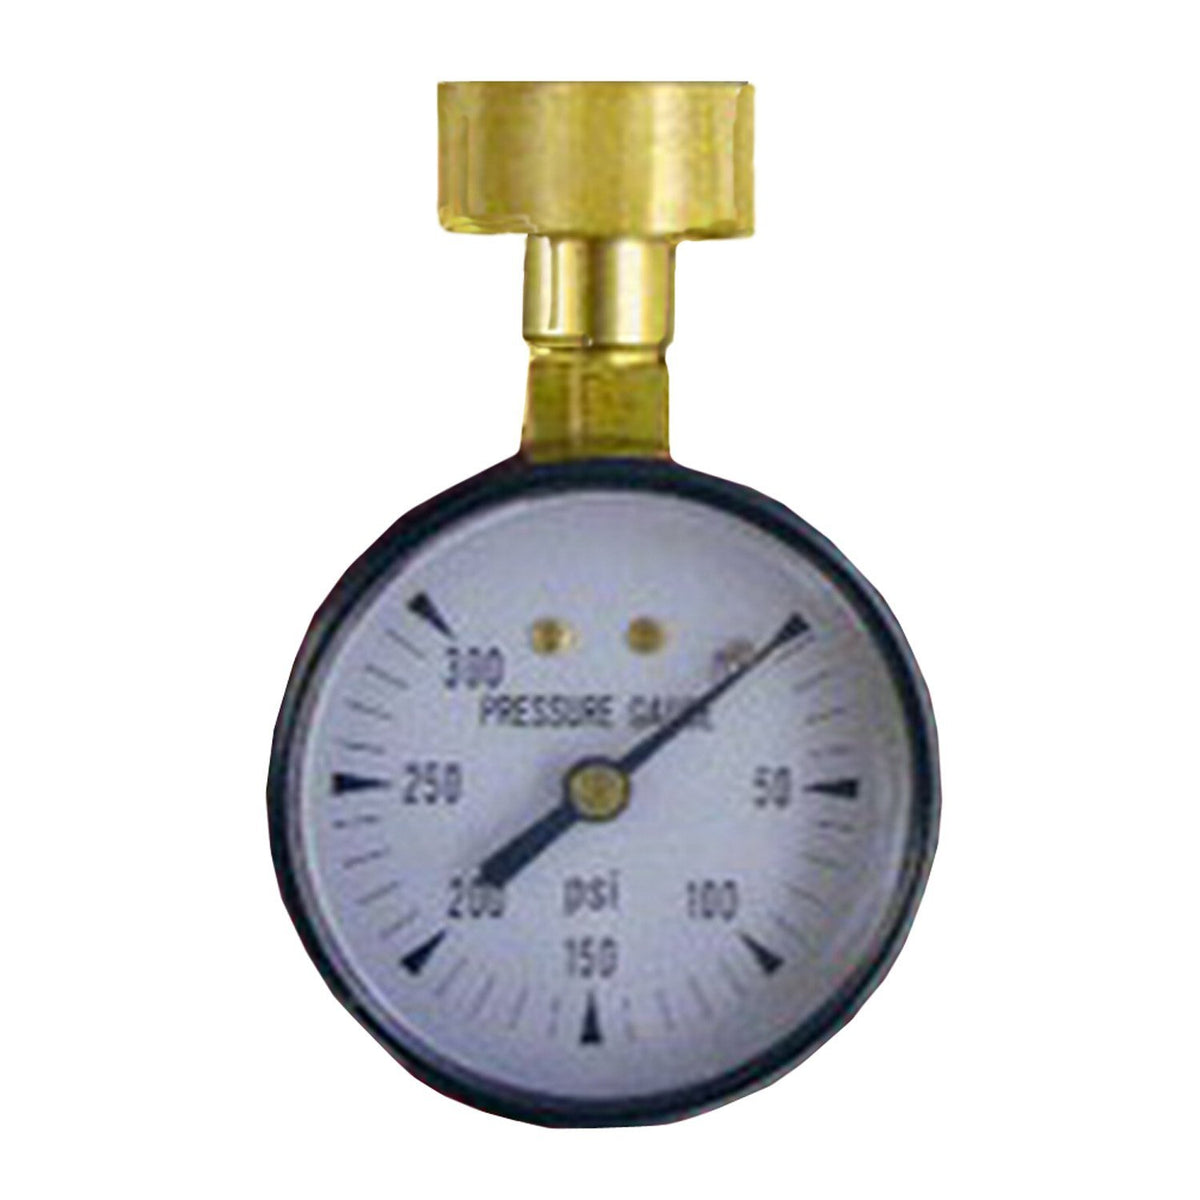 Lasco 13-1901 Water Pressure Test Gauge with Hose Threads, 0 to 300 PSI